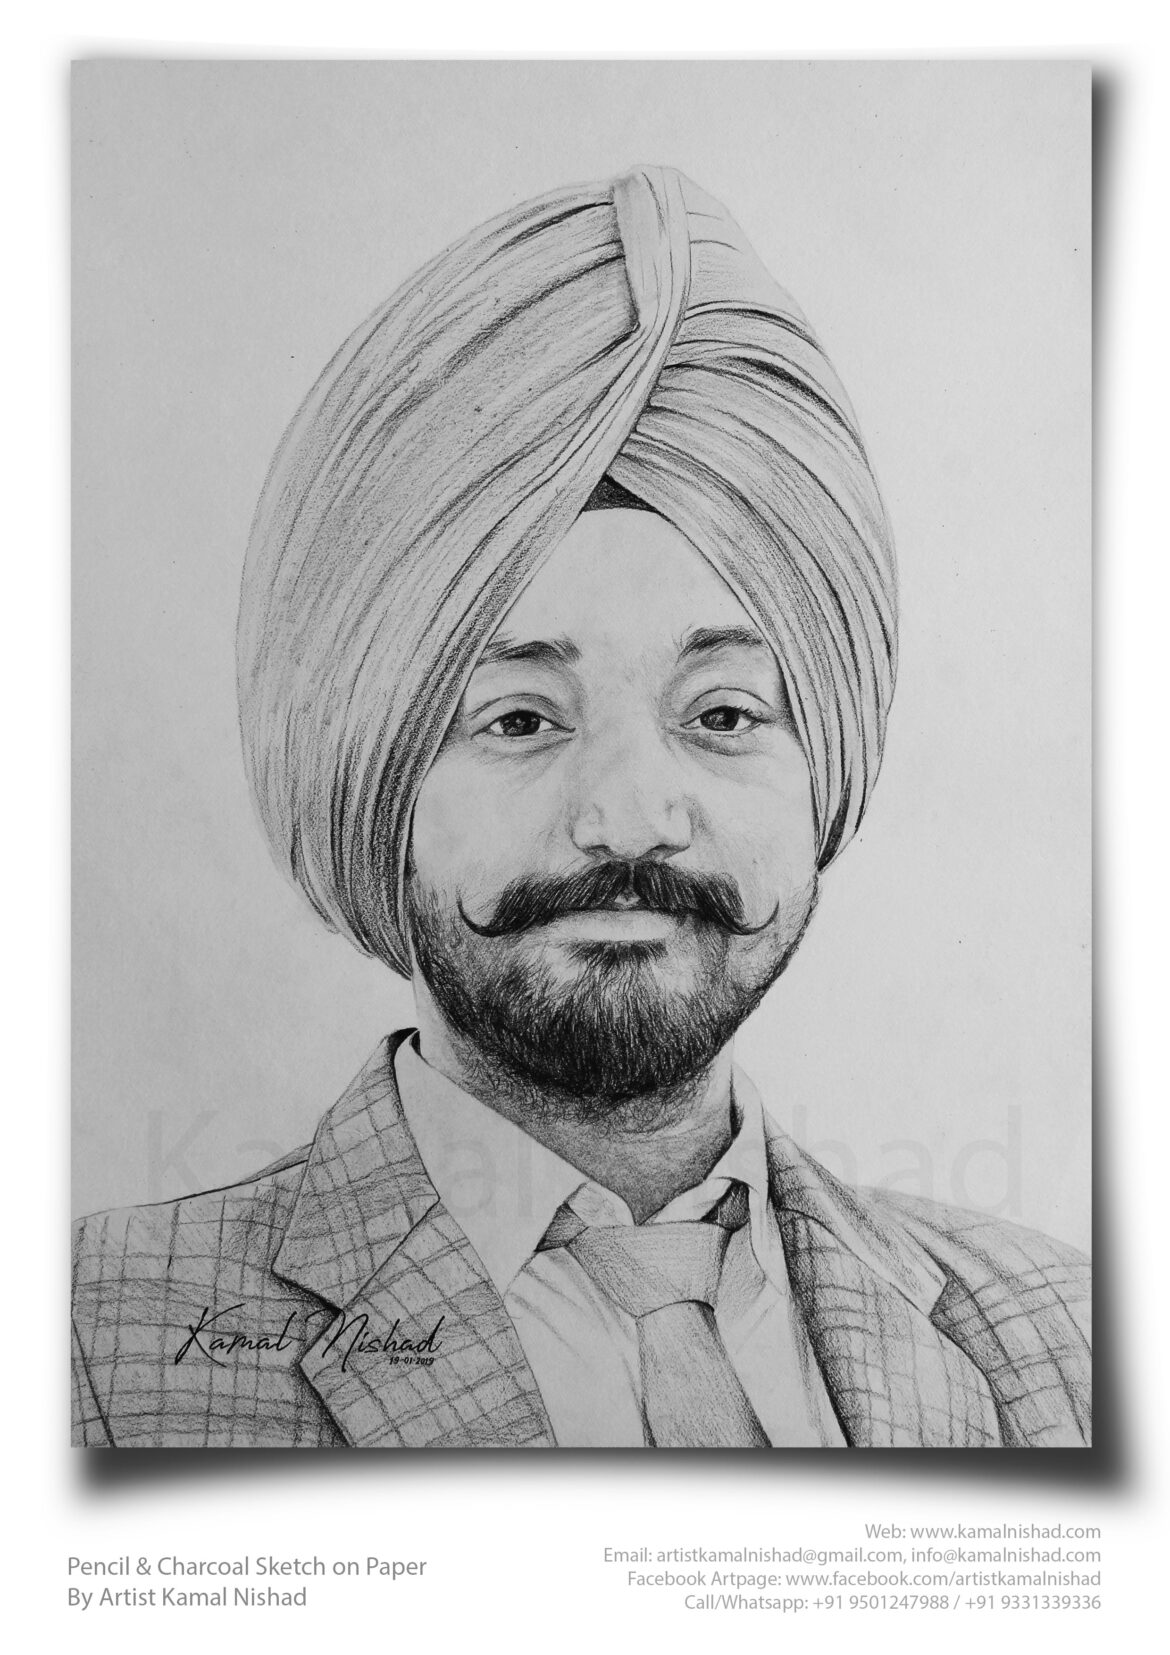 A SIKH MAN | Pencil & Charcoal Sketch This is a Handmade Sketch made with Pencil & Charcoal “A SIKH MAN”. One of my client/customer (MALE) wanted me to draw his own portrait for him, so I did this sketch for him. SIZE: A3 Created by © Kamal Nishad. All rights reserved.